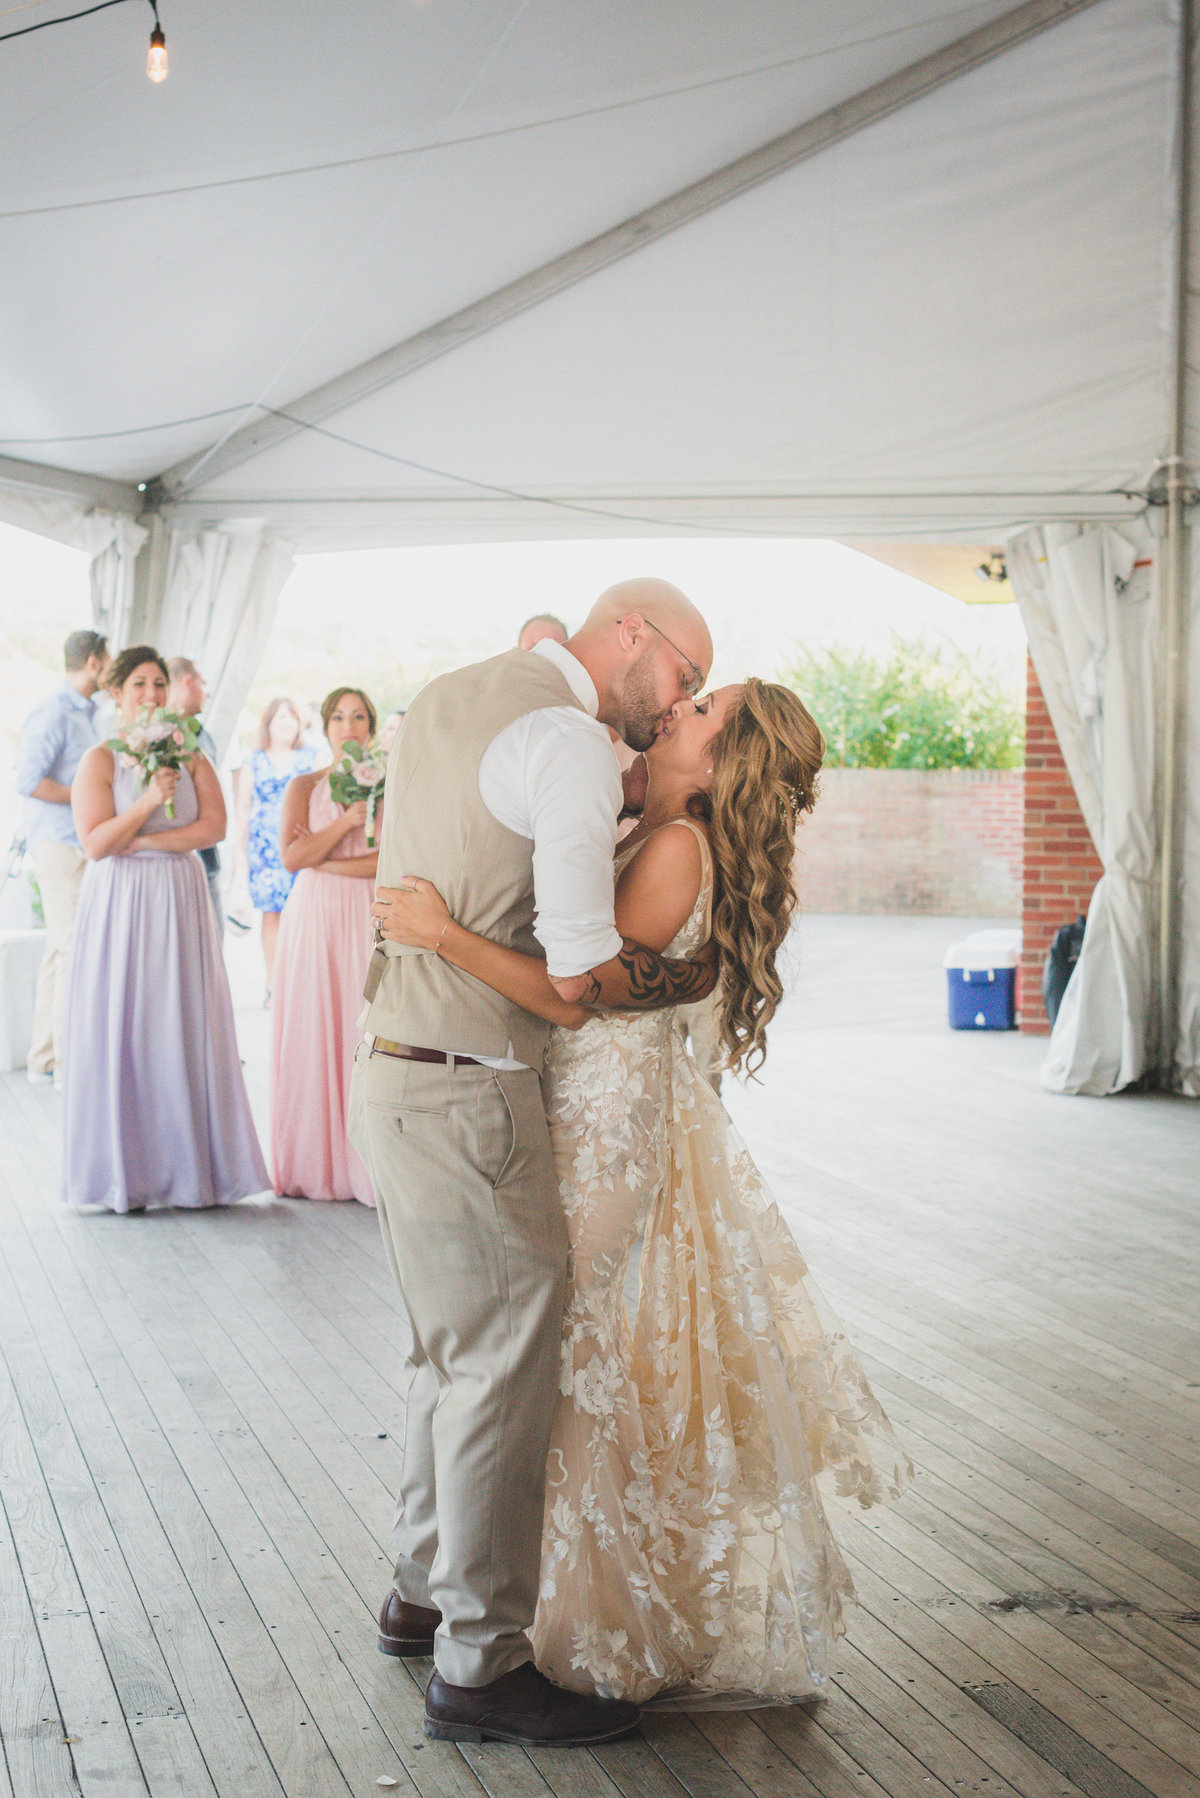 photo of bride and groom kissing on the dance floor during wedding reception at Pavilion at Sunken Meadow